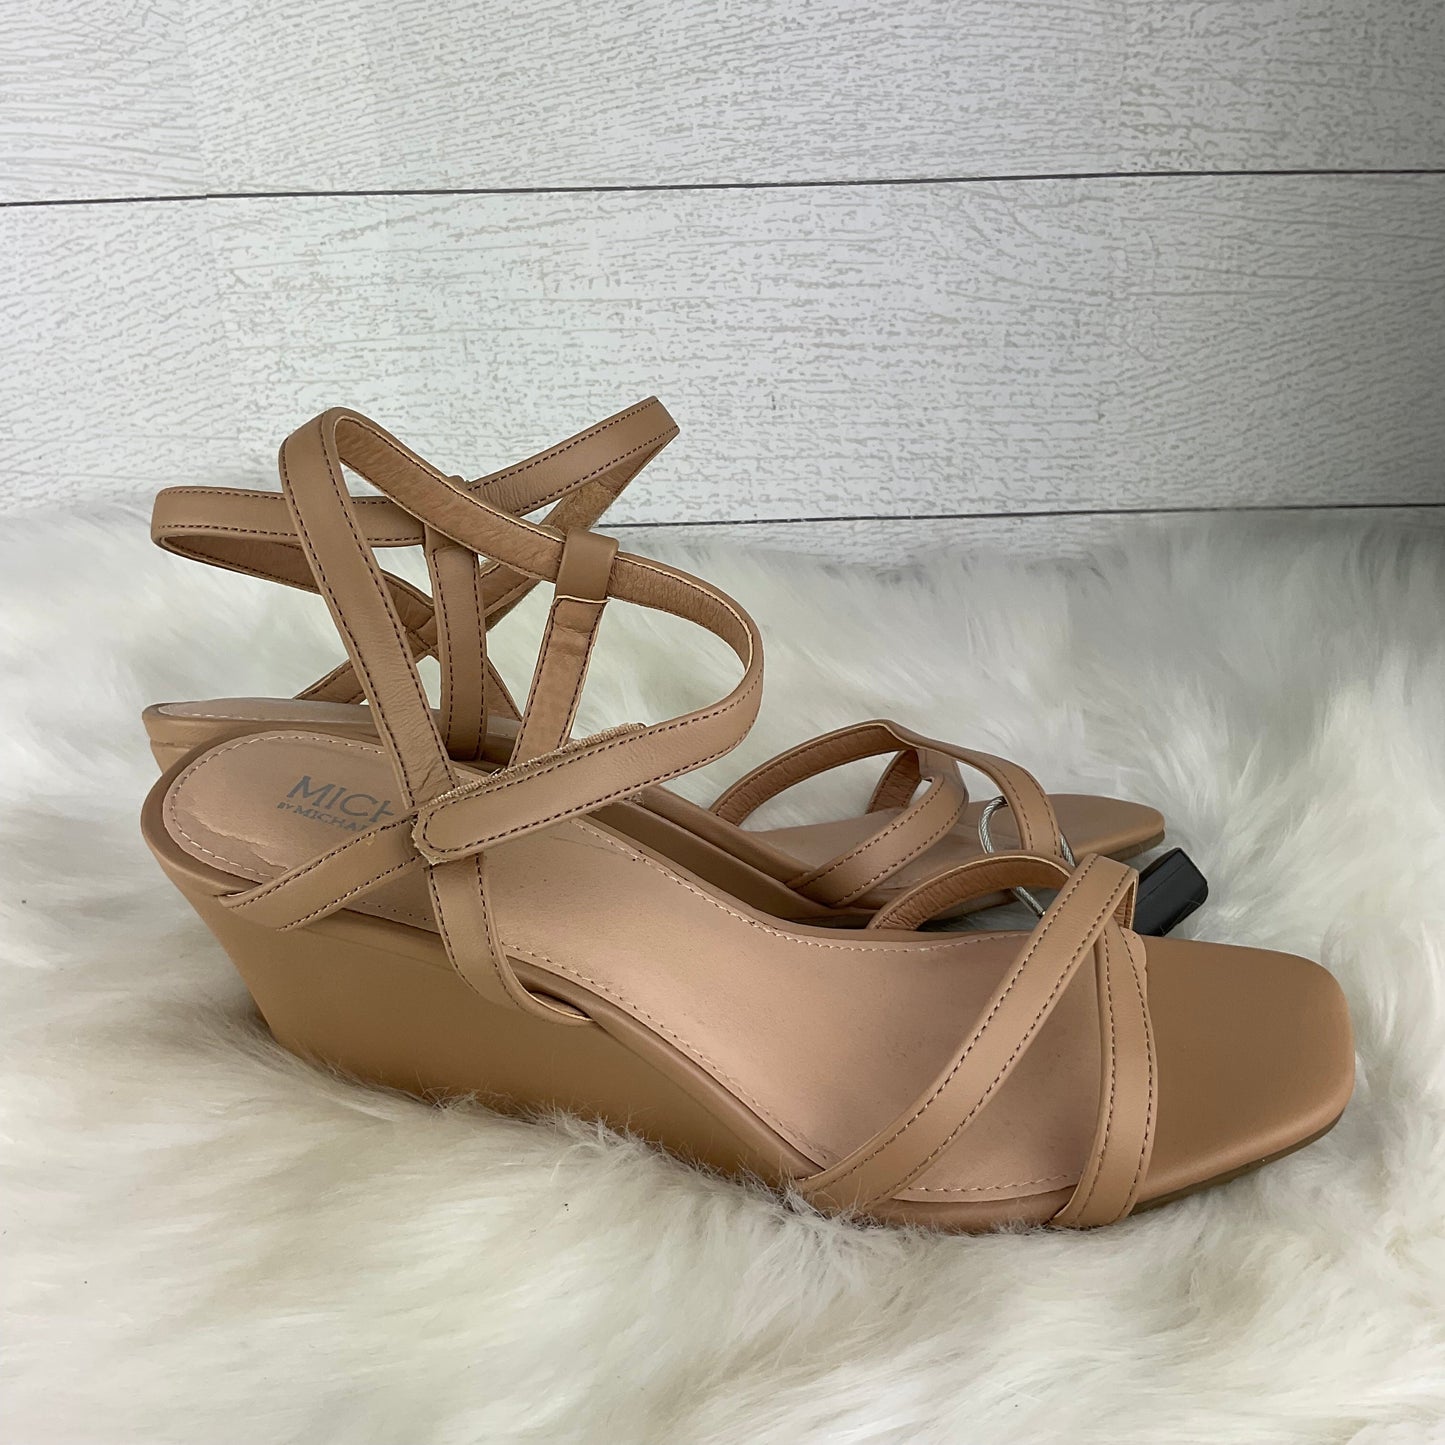 Sandals Heels Wedge By Michael Shannon  Size: 9.5